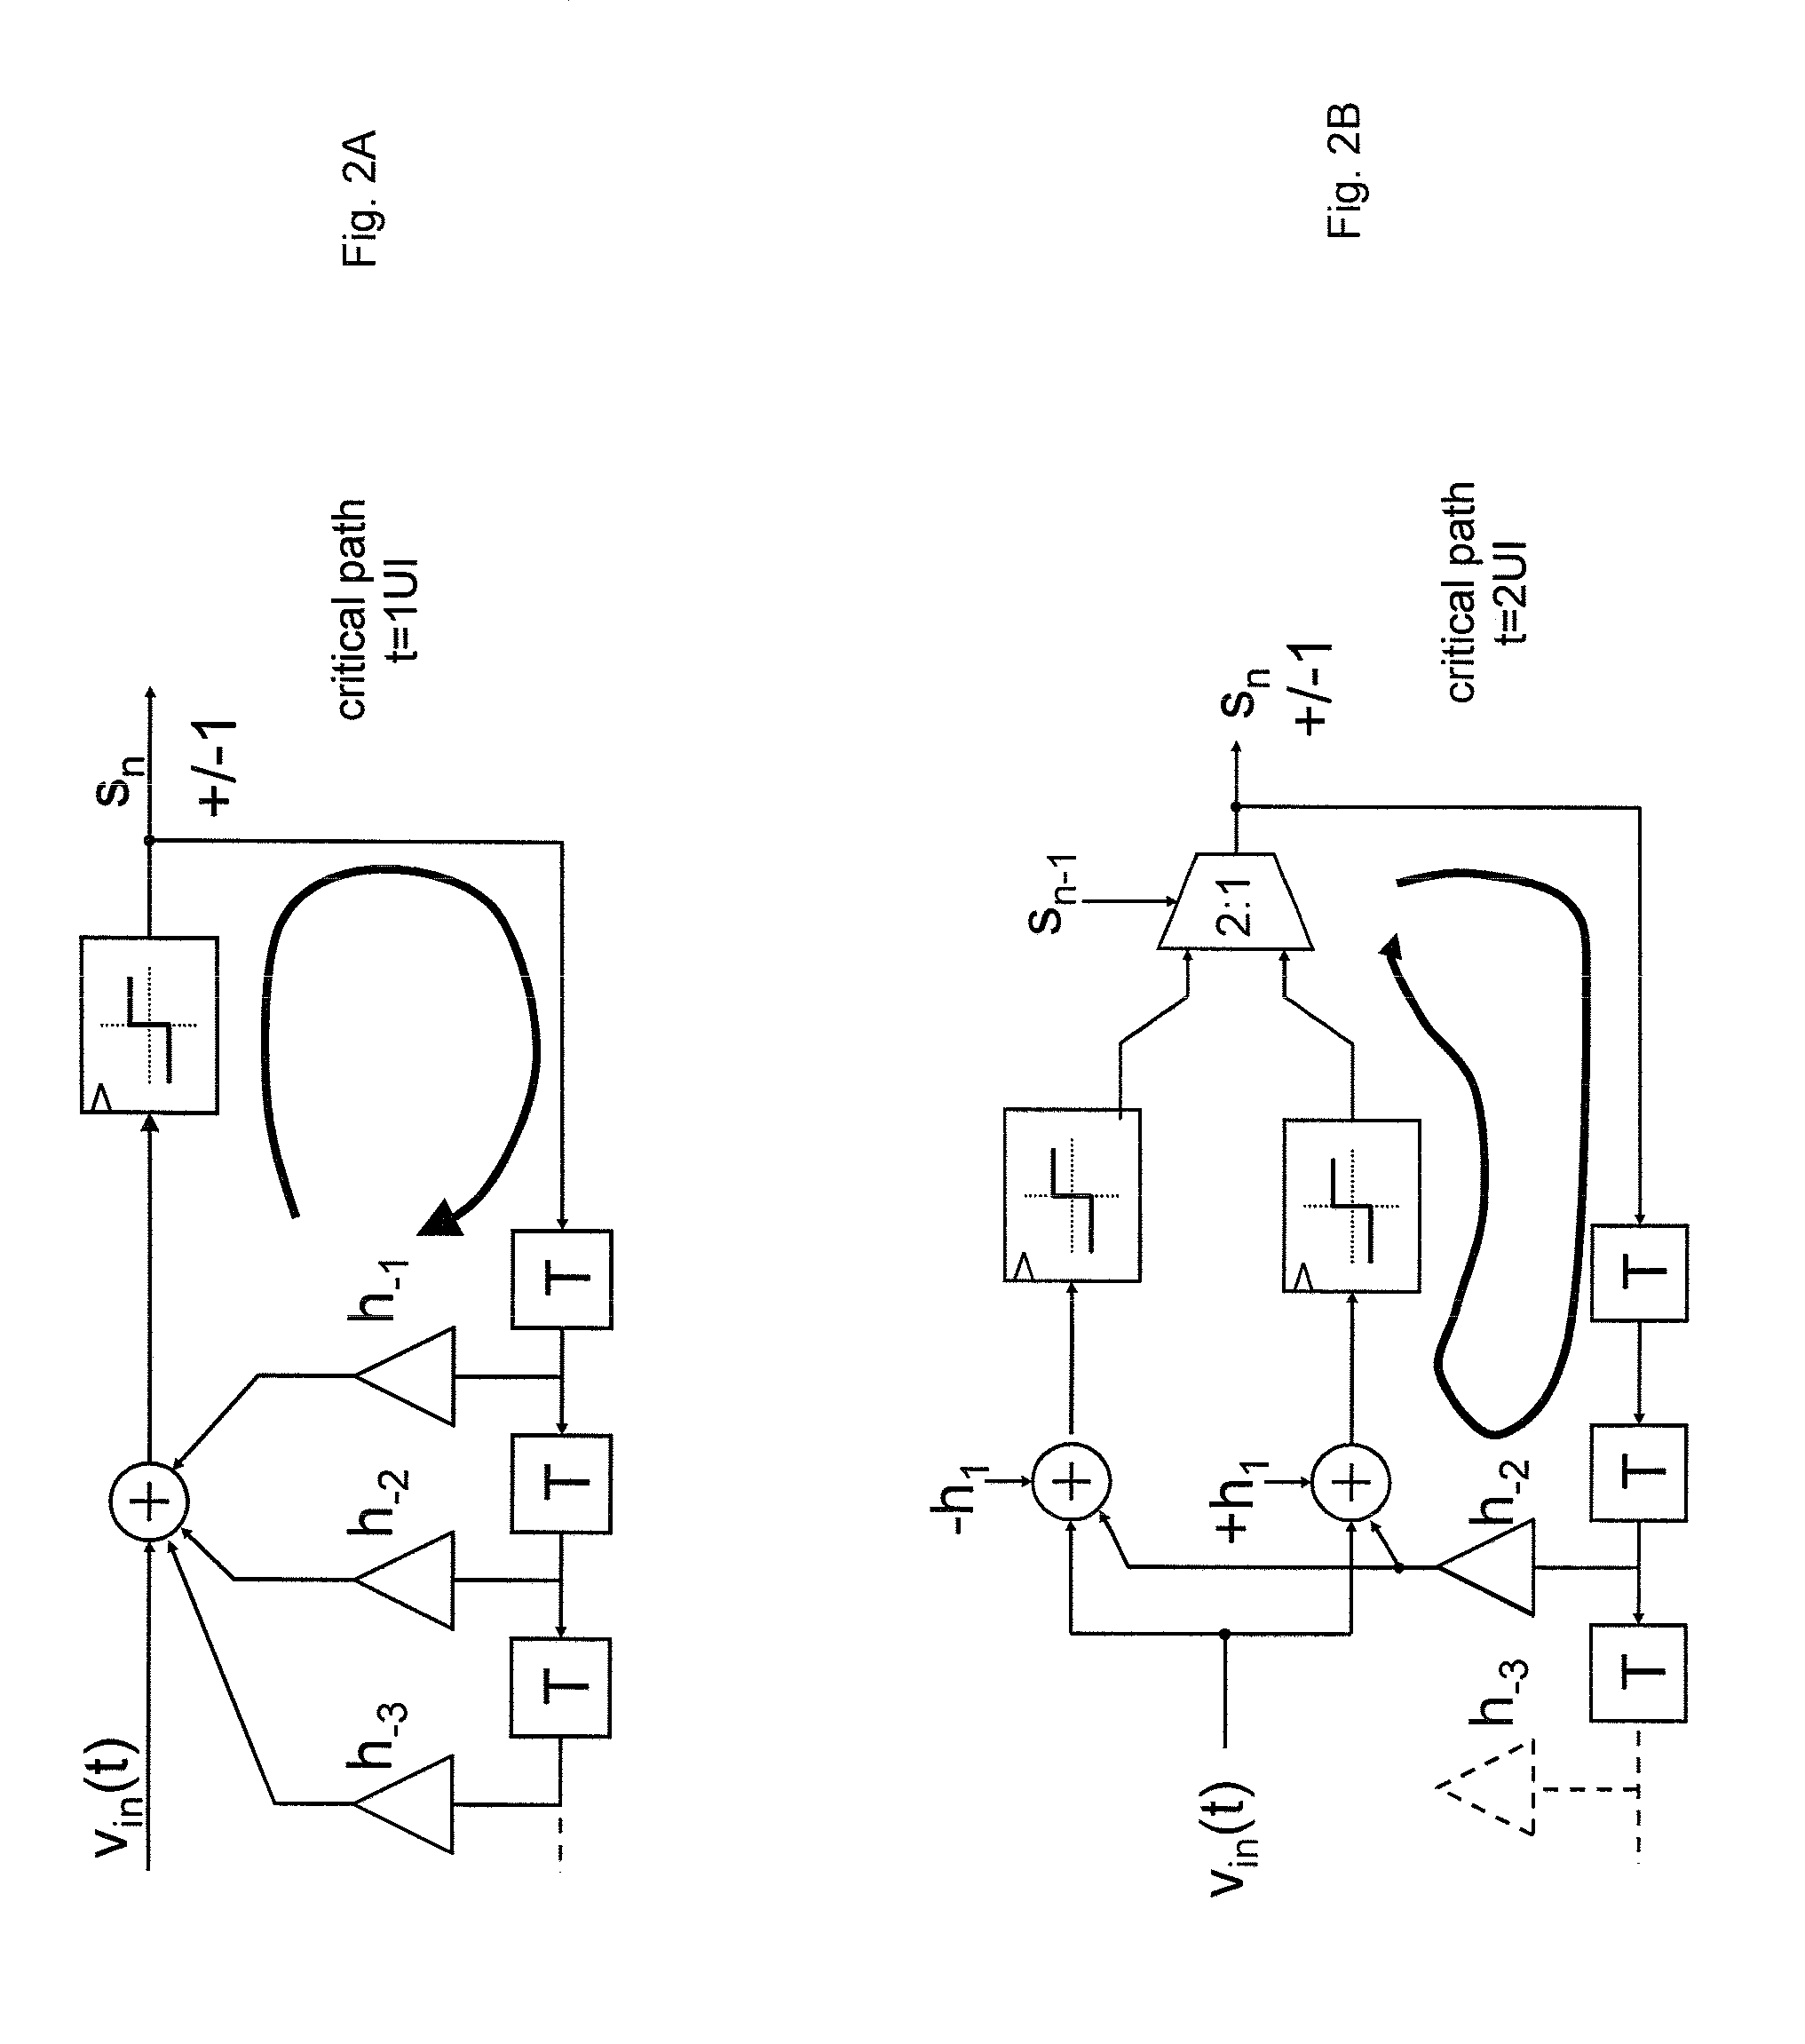 Method and system for low-power integrating decision feedback equalizer with fast switched-capacitor feed forward path